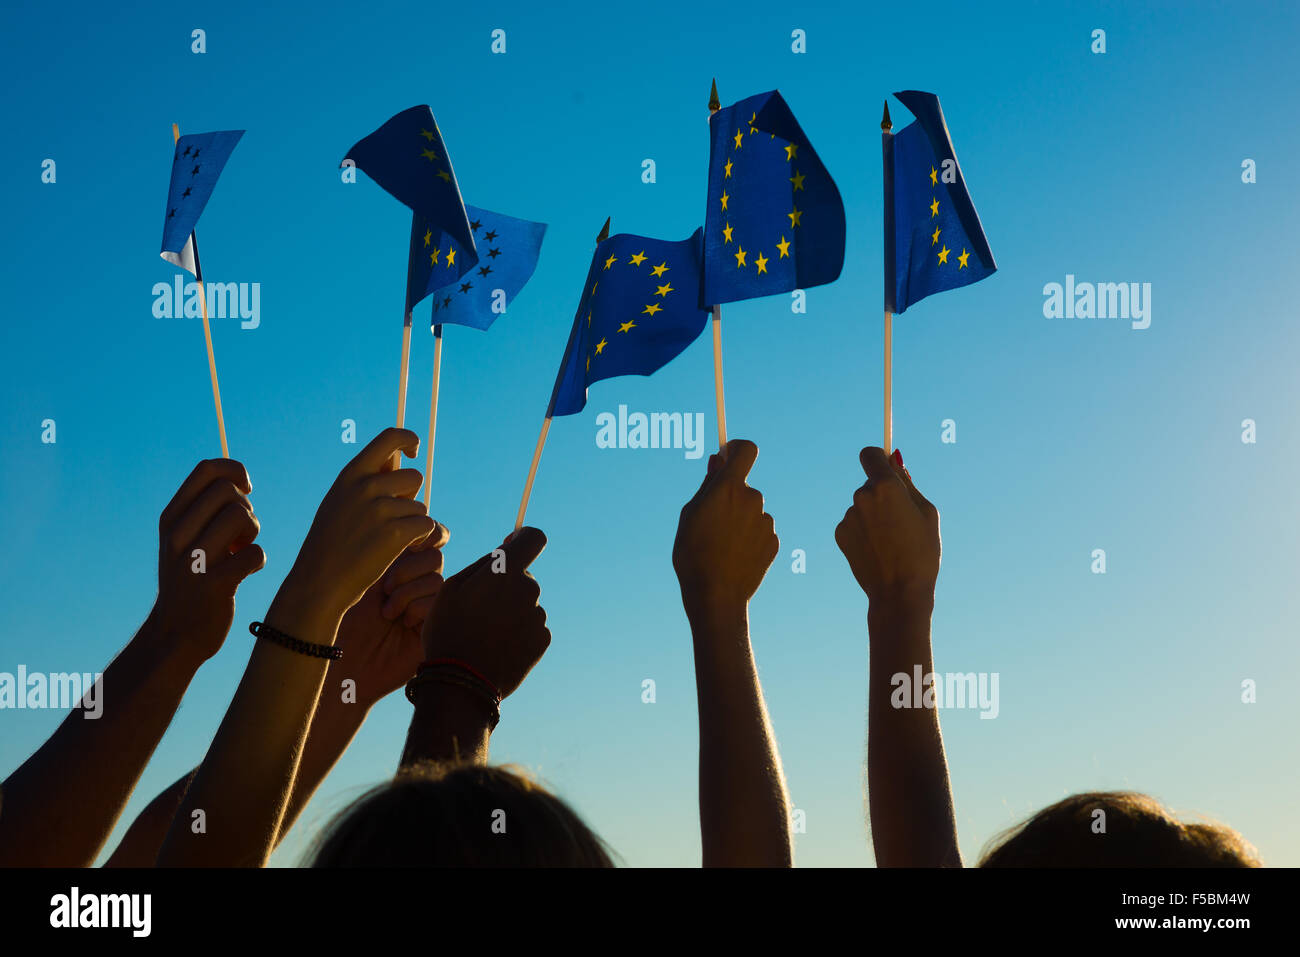 People holding flags of the European Union. Stock Photo